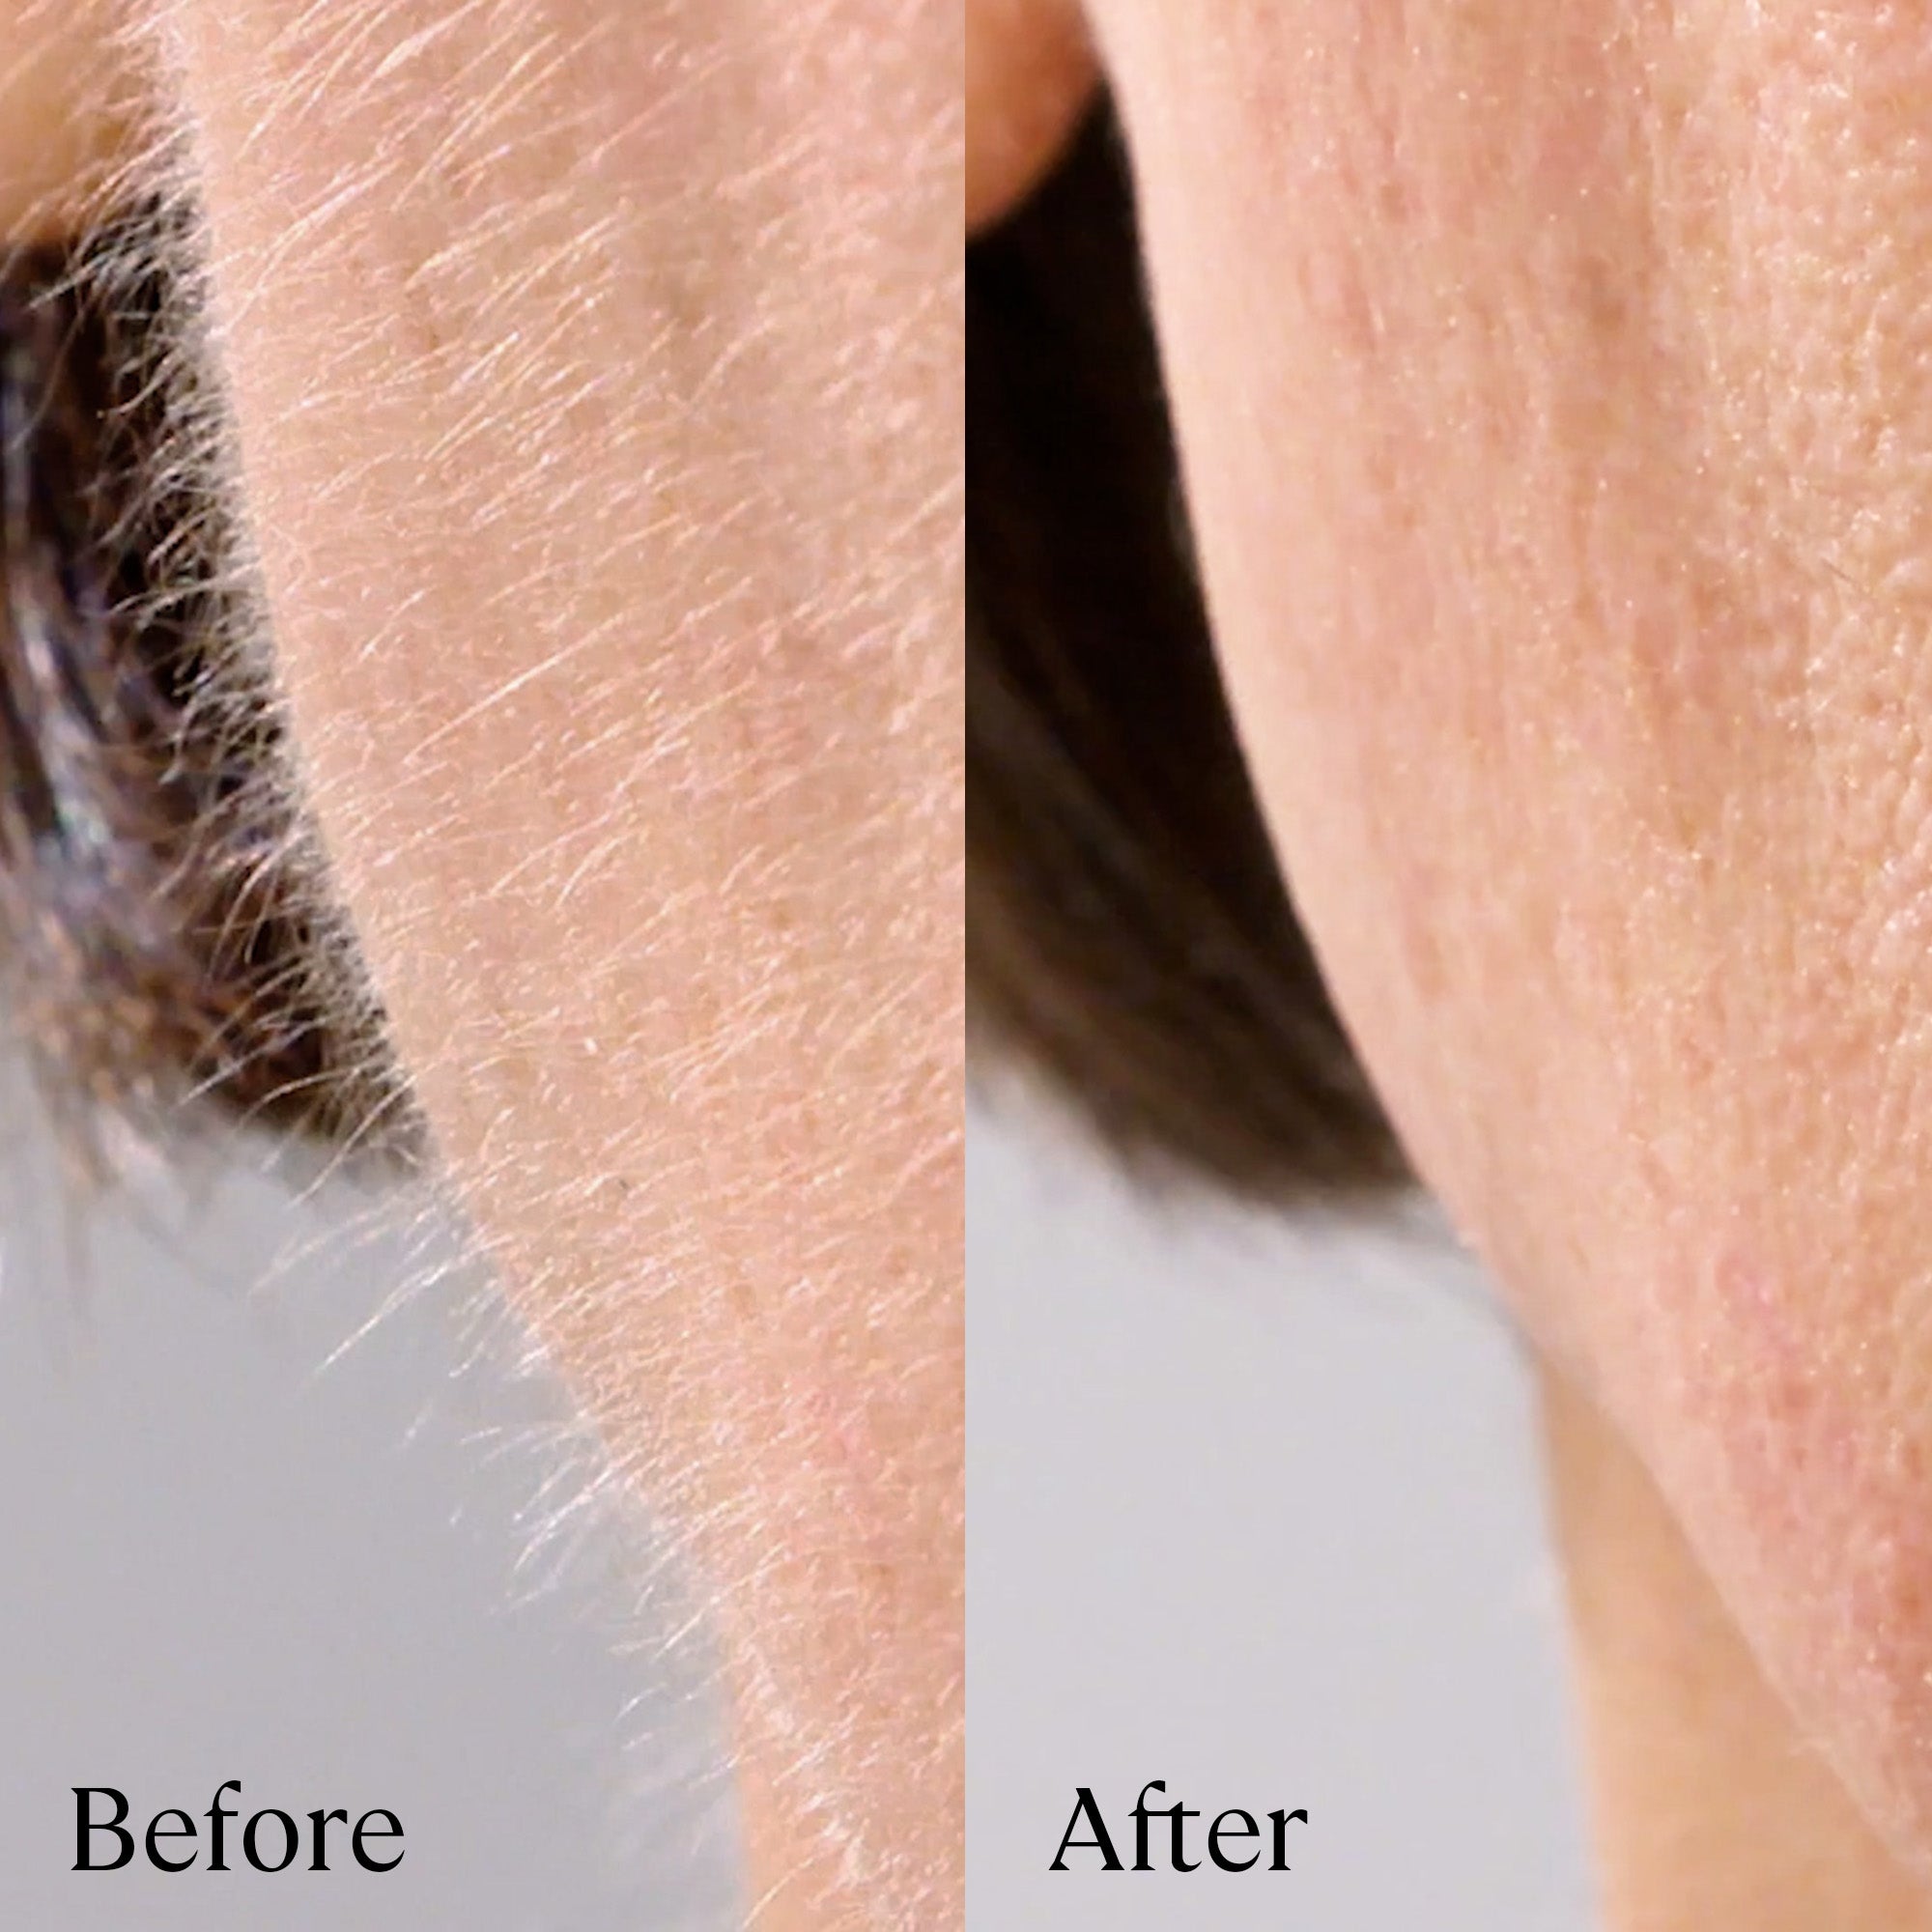 Pink . Side-by-side close-up images of an ear, labeled "before" with visible hair, and "after" with the hair removed, indicating the effectiveness of Michael Todd Beauty's 4 in 1 Dermaplaning & Post Treatment System.